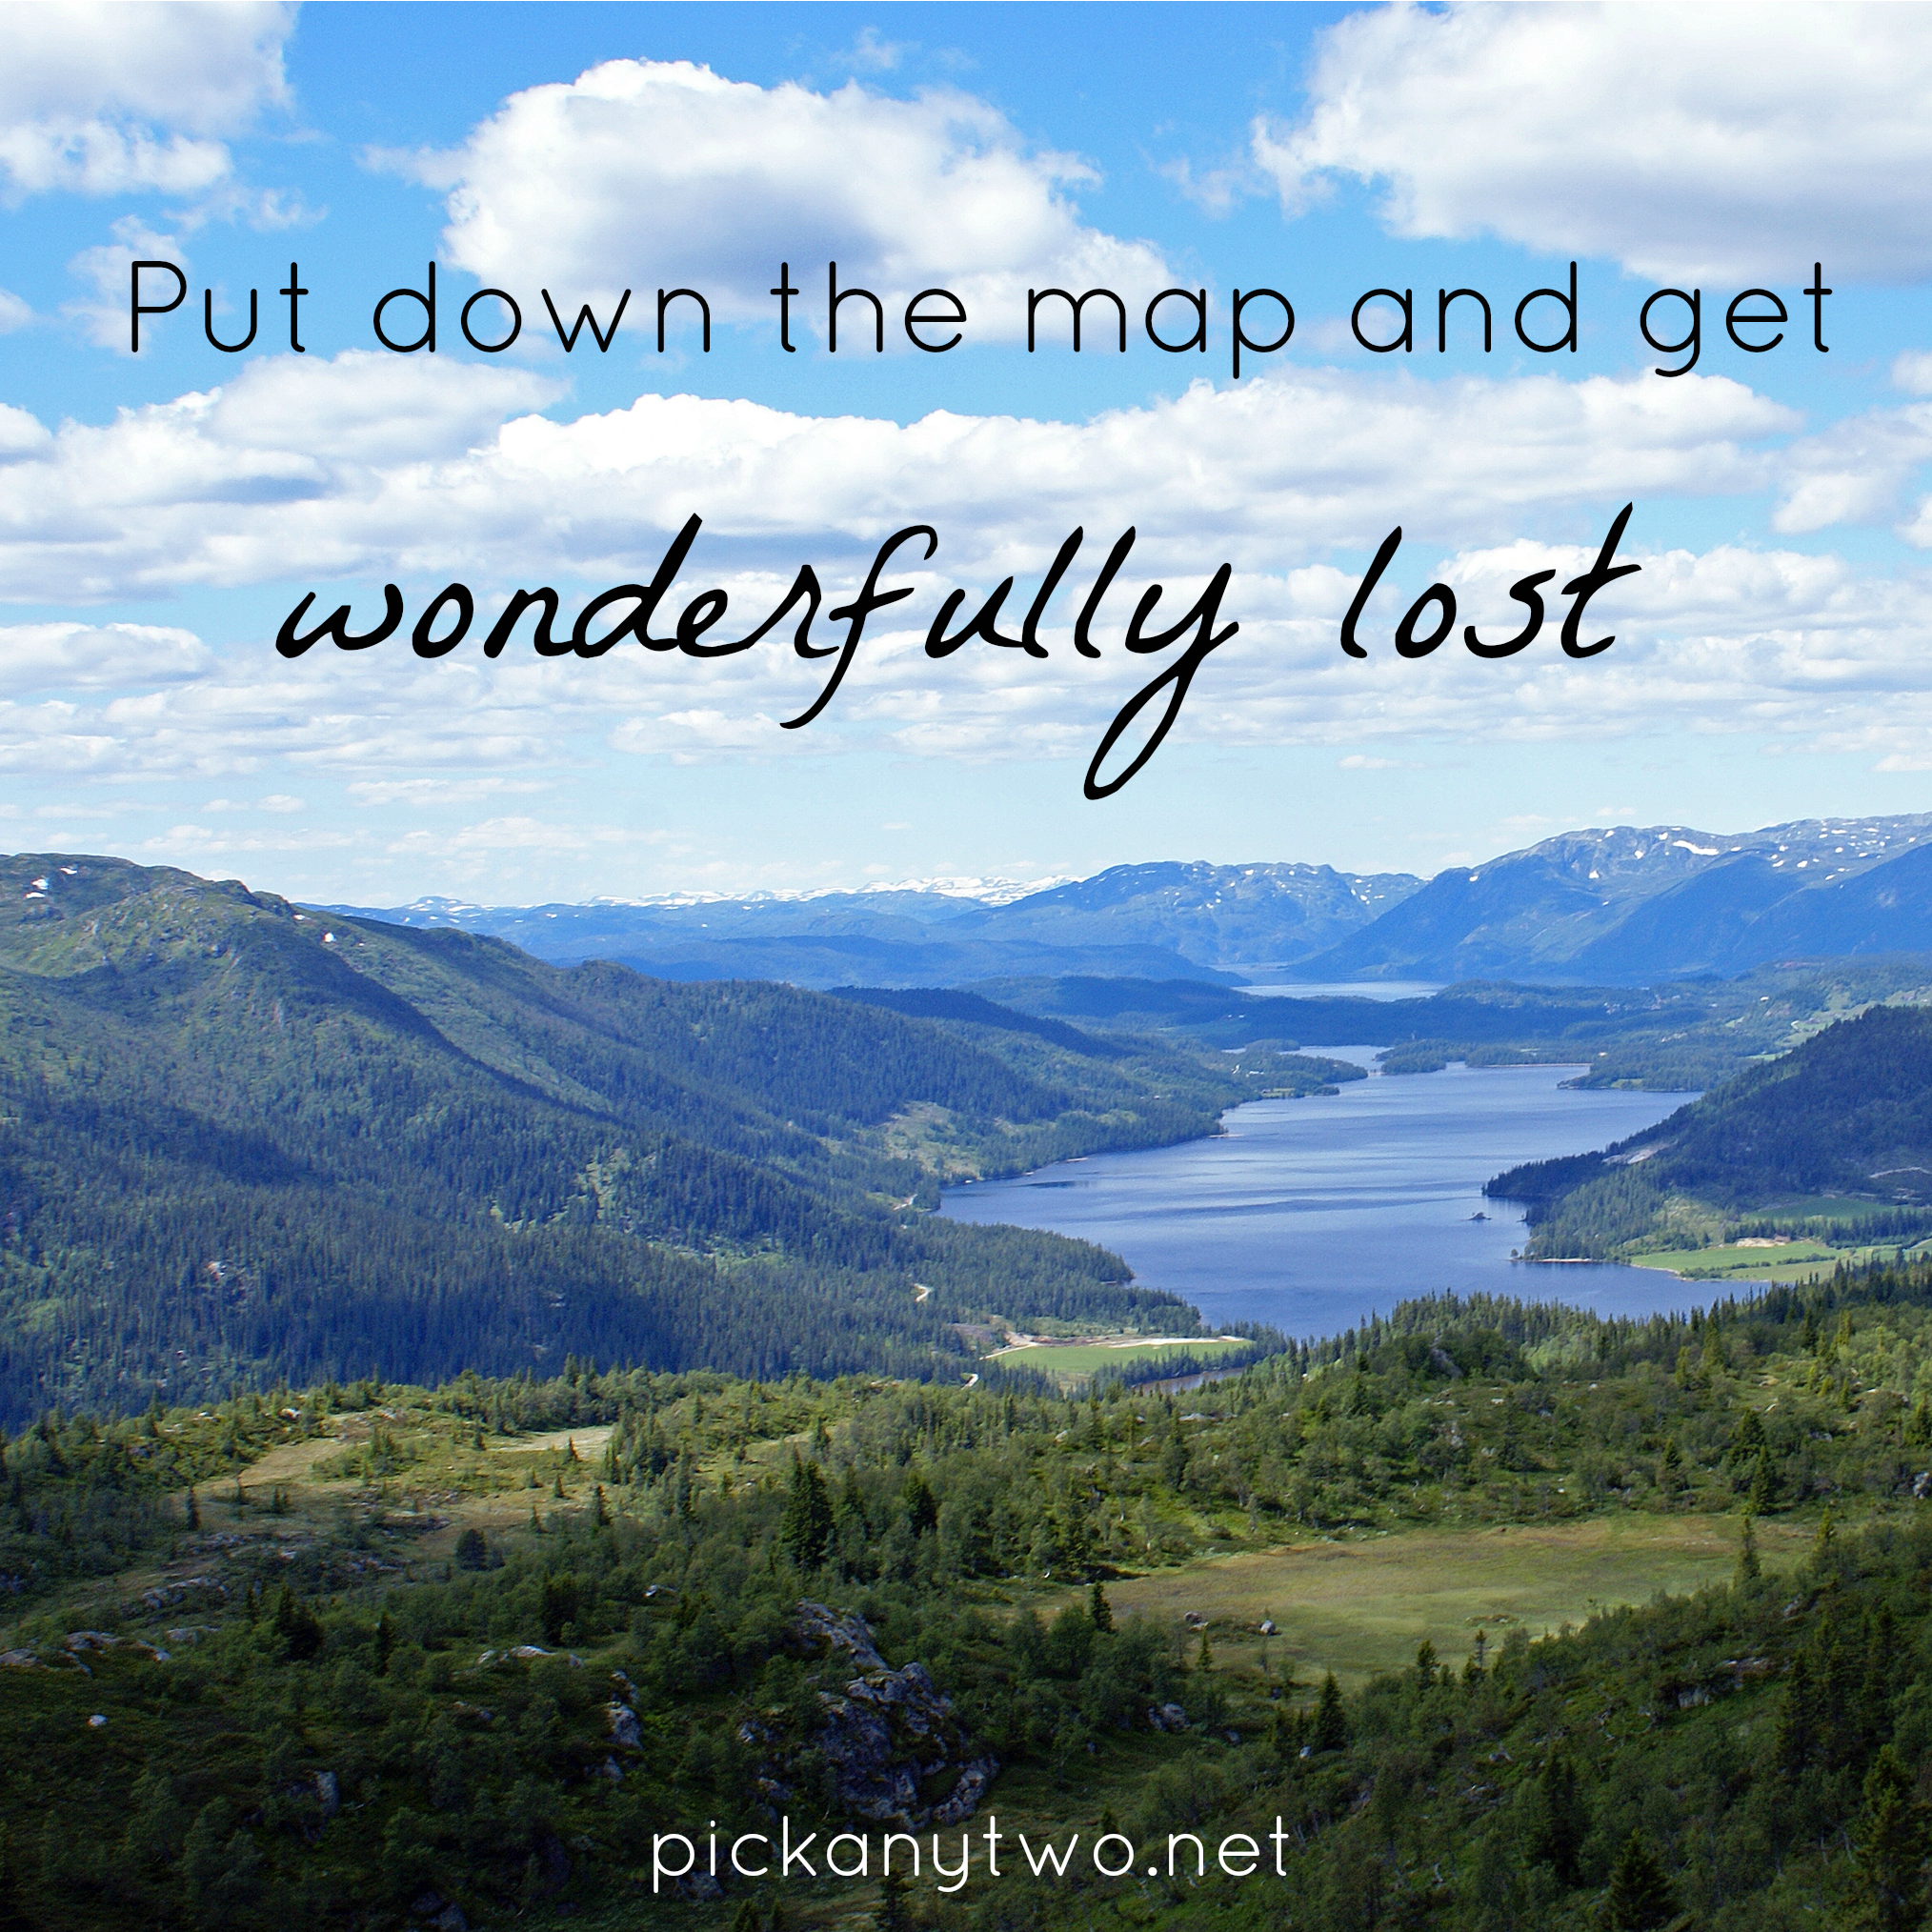 Feel Good Friday: Put Down the Map